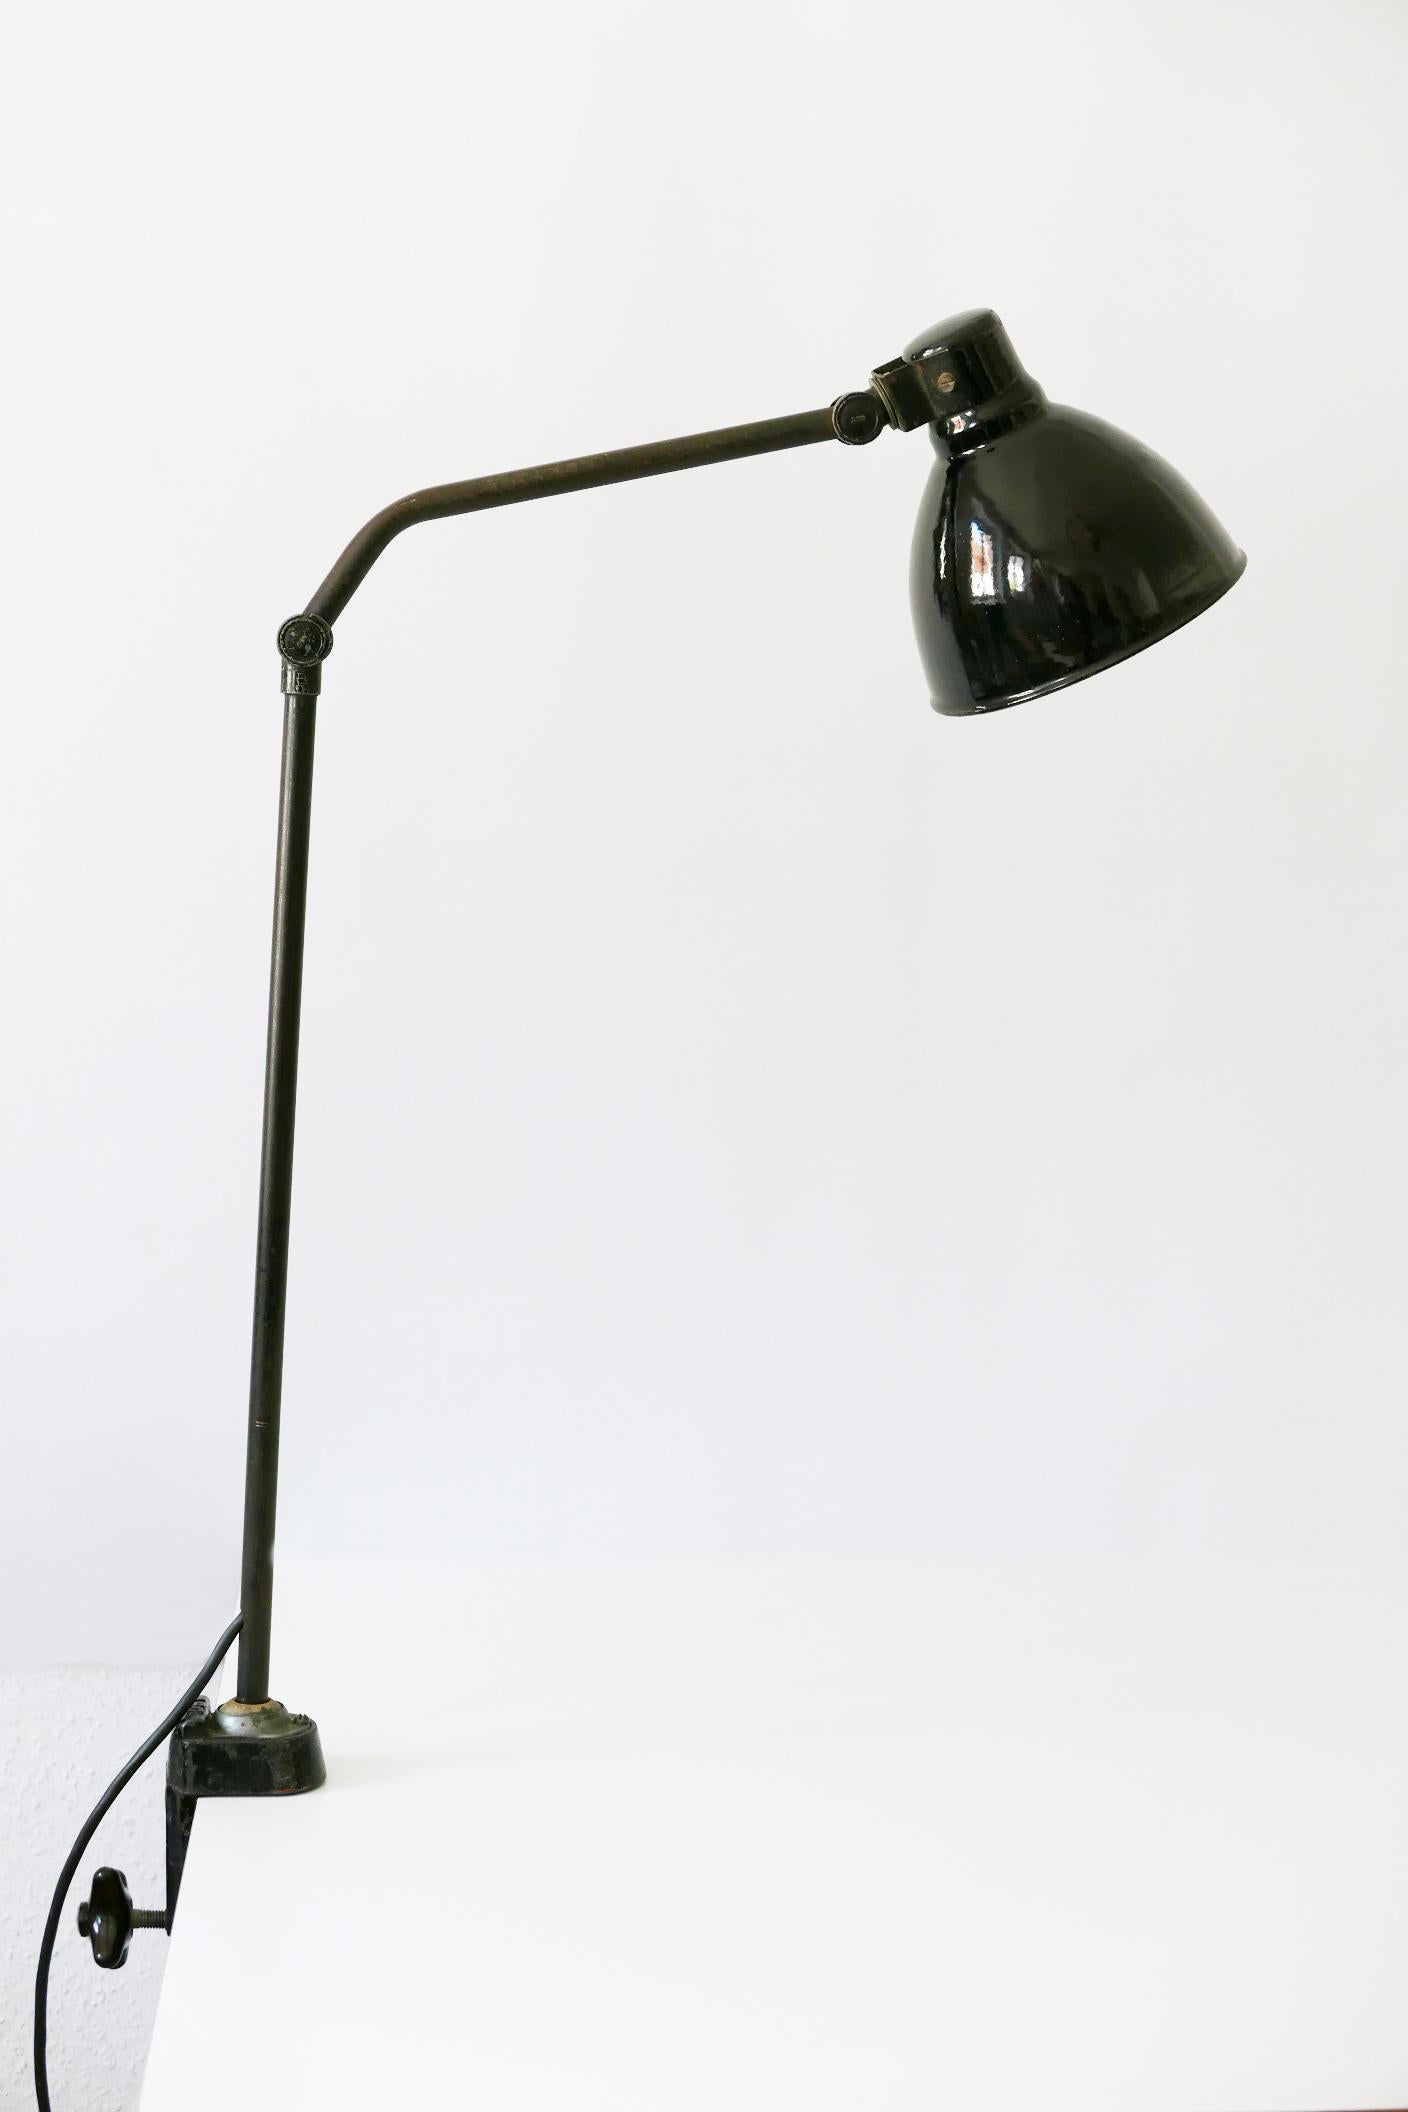 Enameled Bauhaus Task Lamp or Clamp Table Light by Peter Behrens for AEG 1920s, Germany